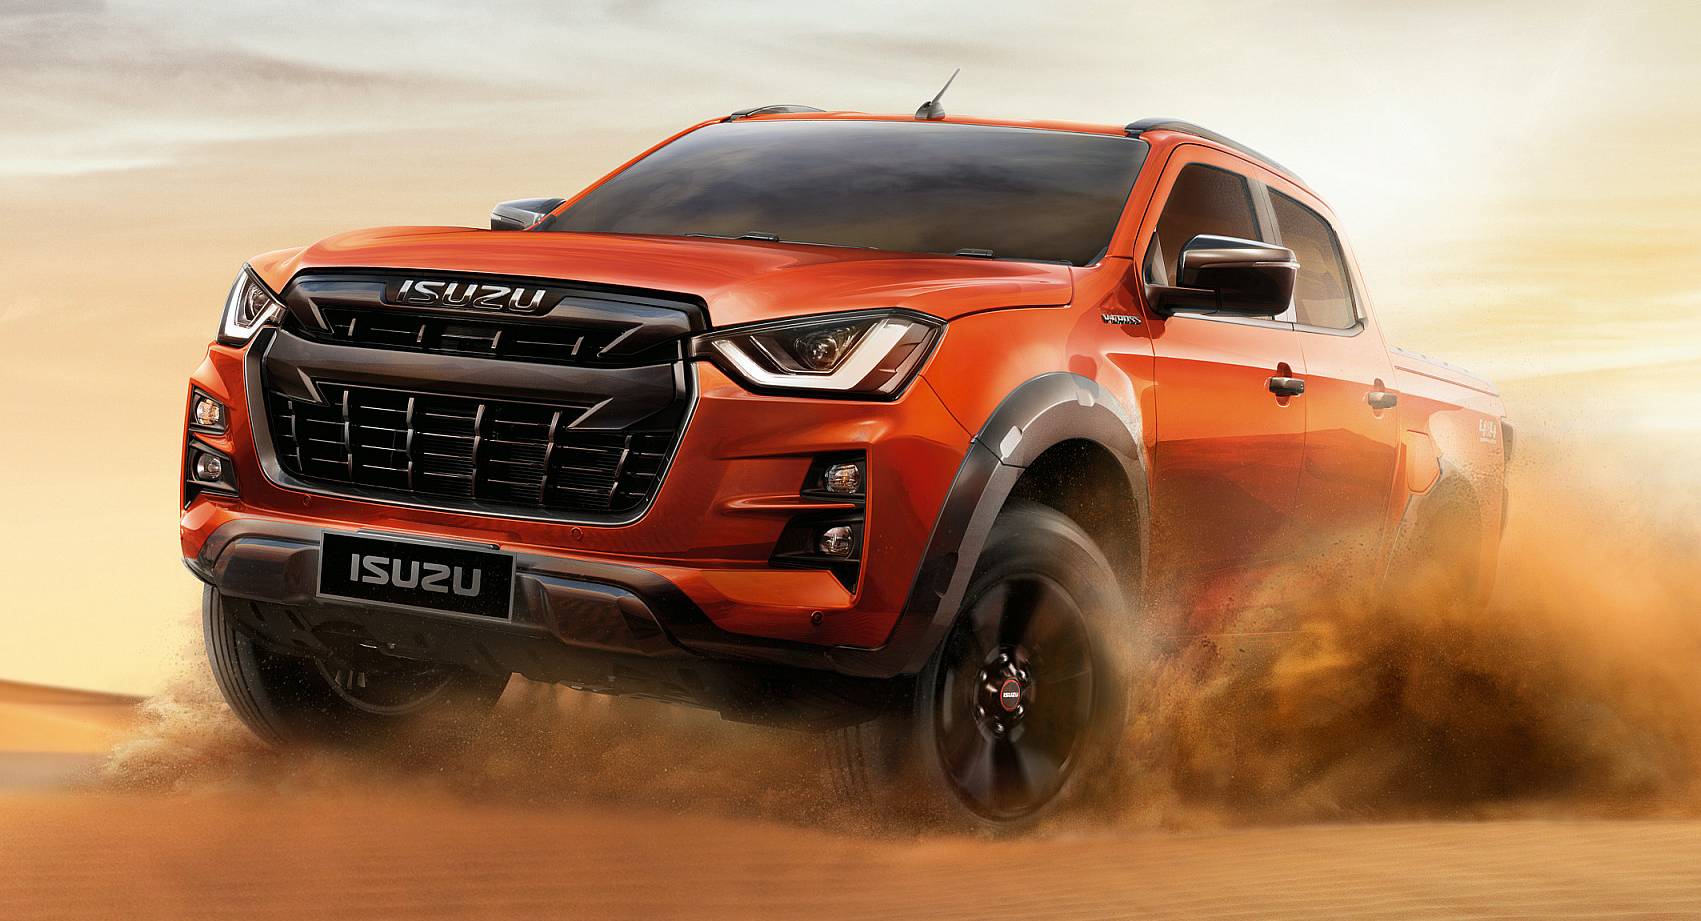 India-Bound 2020 Isuzu D-Max V-Cross - 5 Things To Know